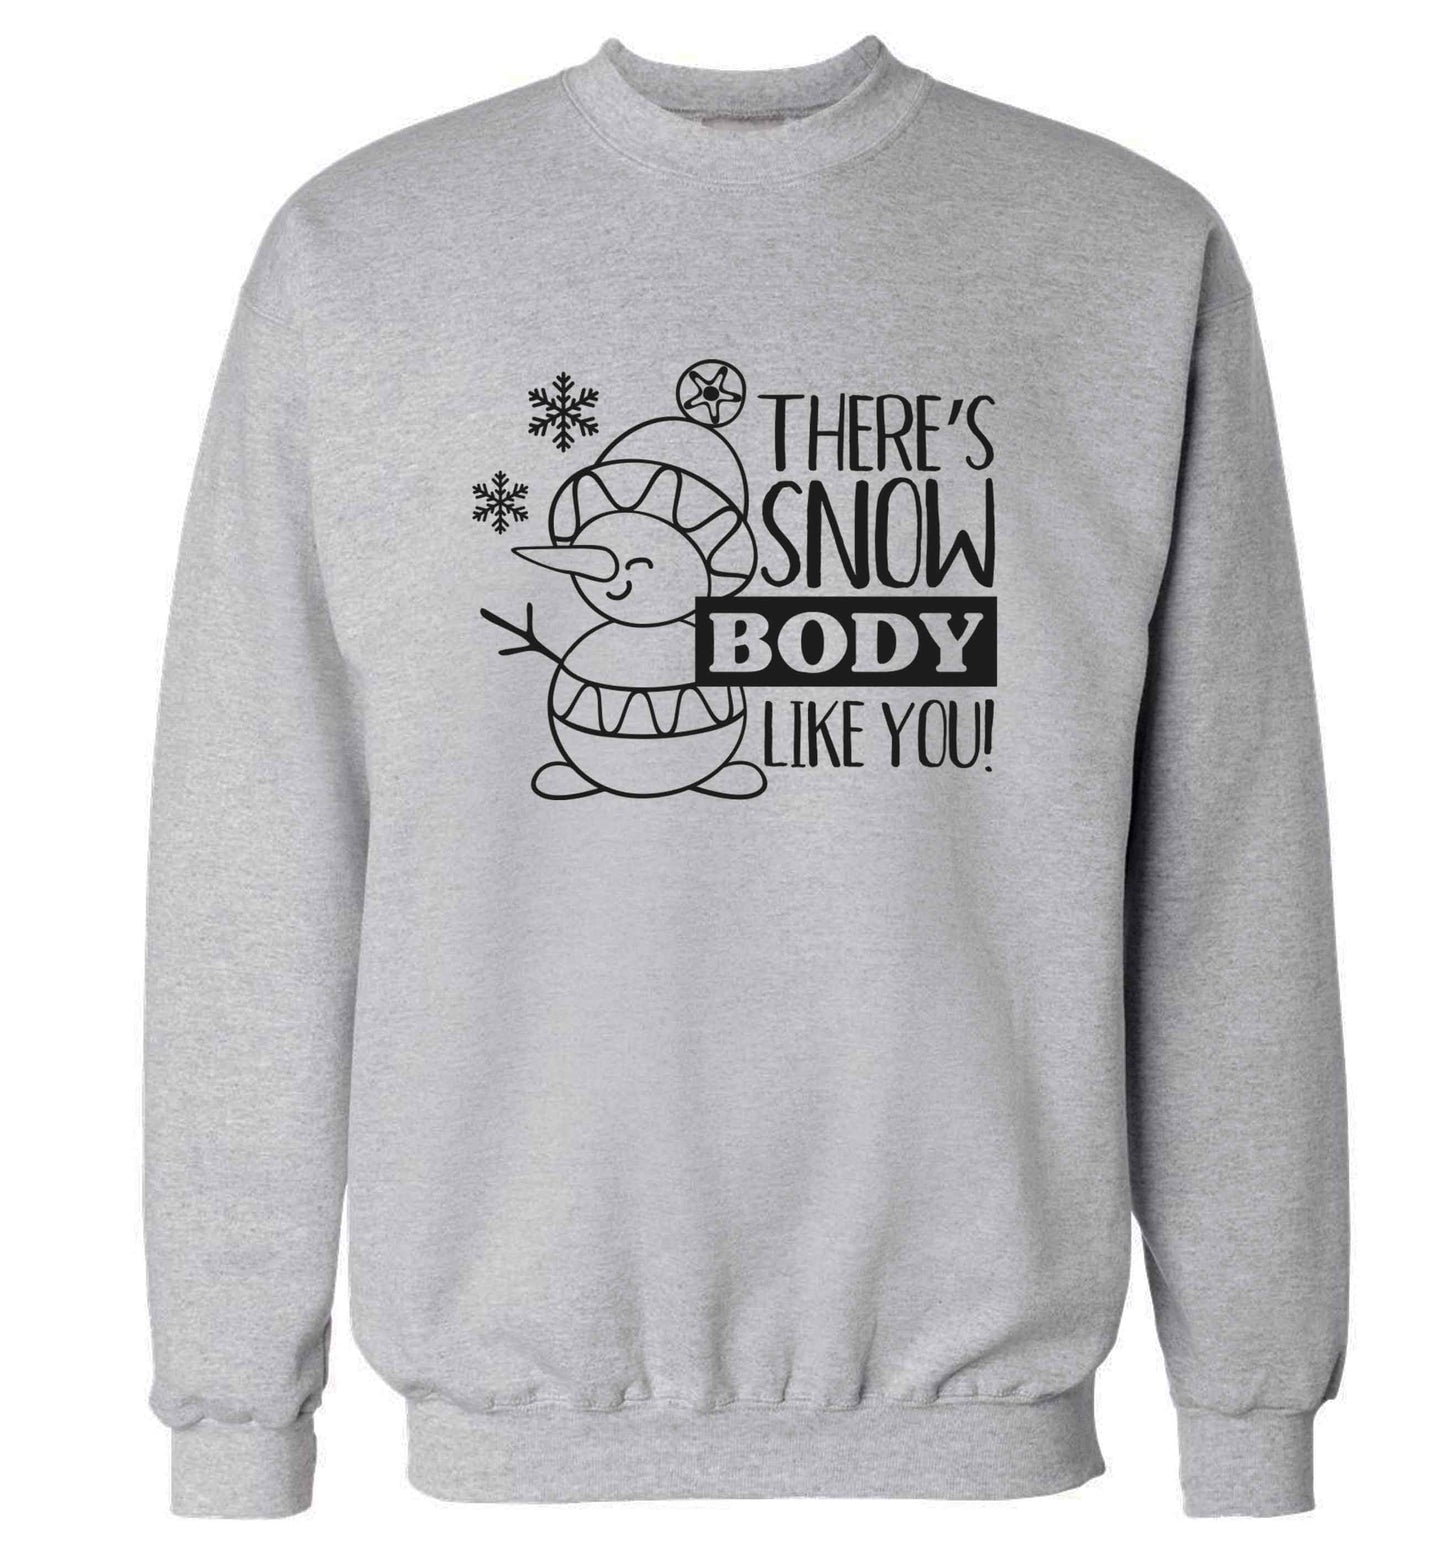 There's snow body like you adult's unisex grey sweater 2XL